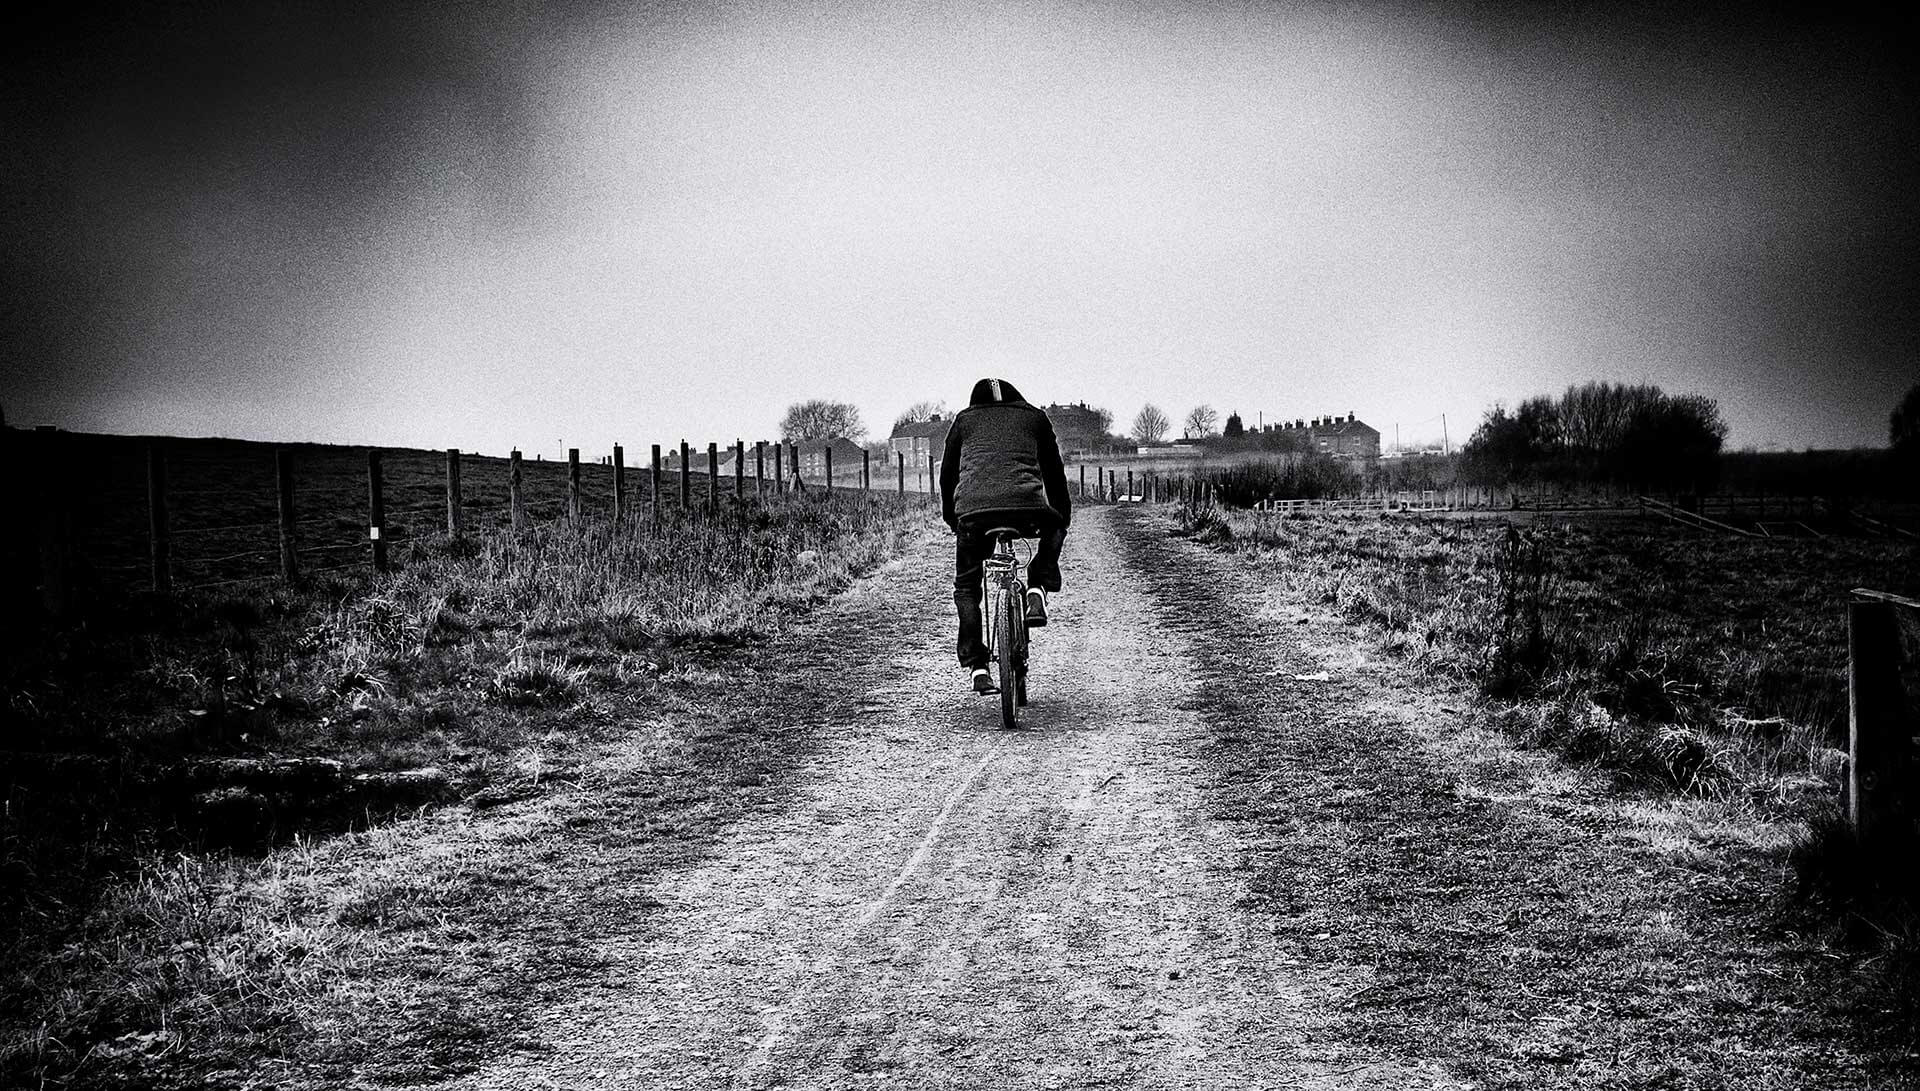 A person riding a bike on a dirt road captured in street photography.